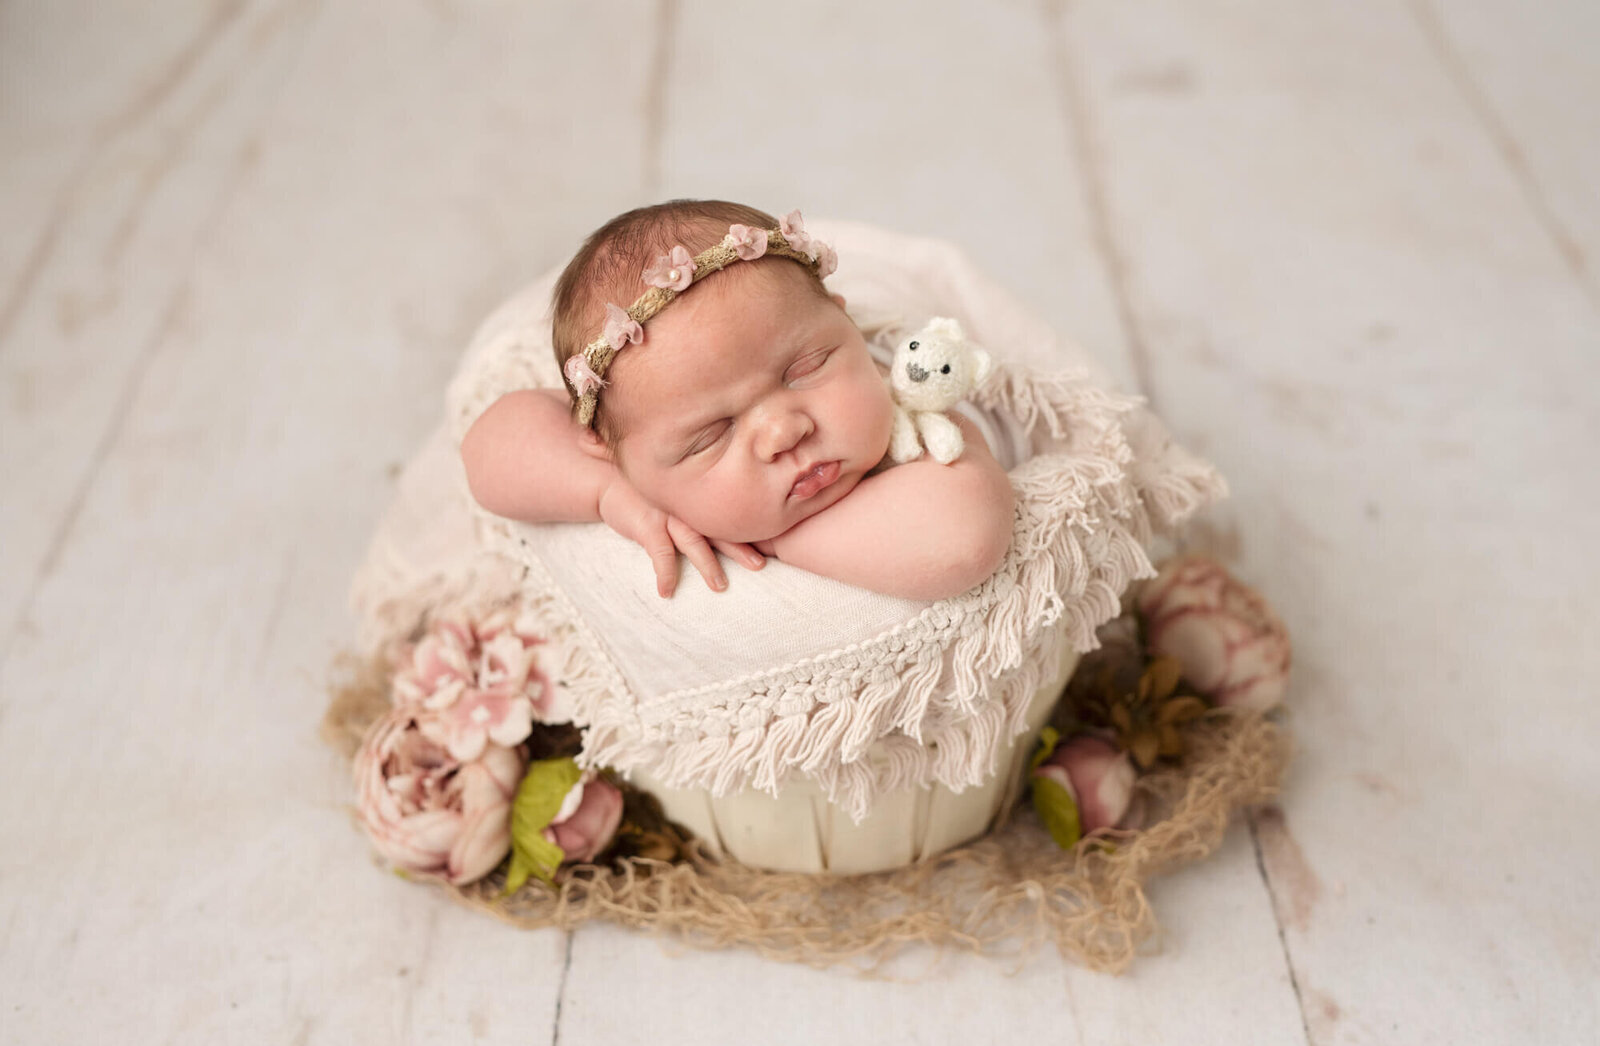 10 day old baby girl in cream bucket with pink layer and flowers